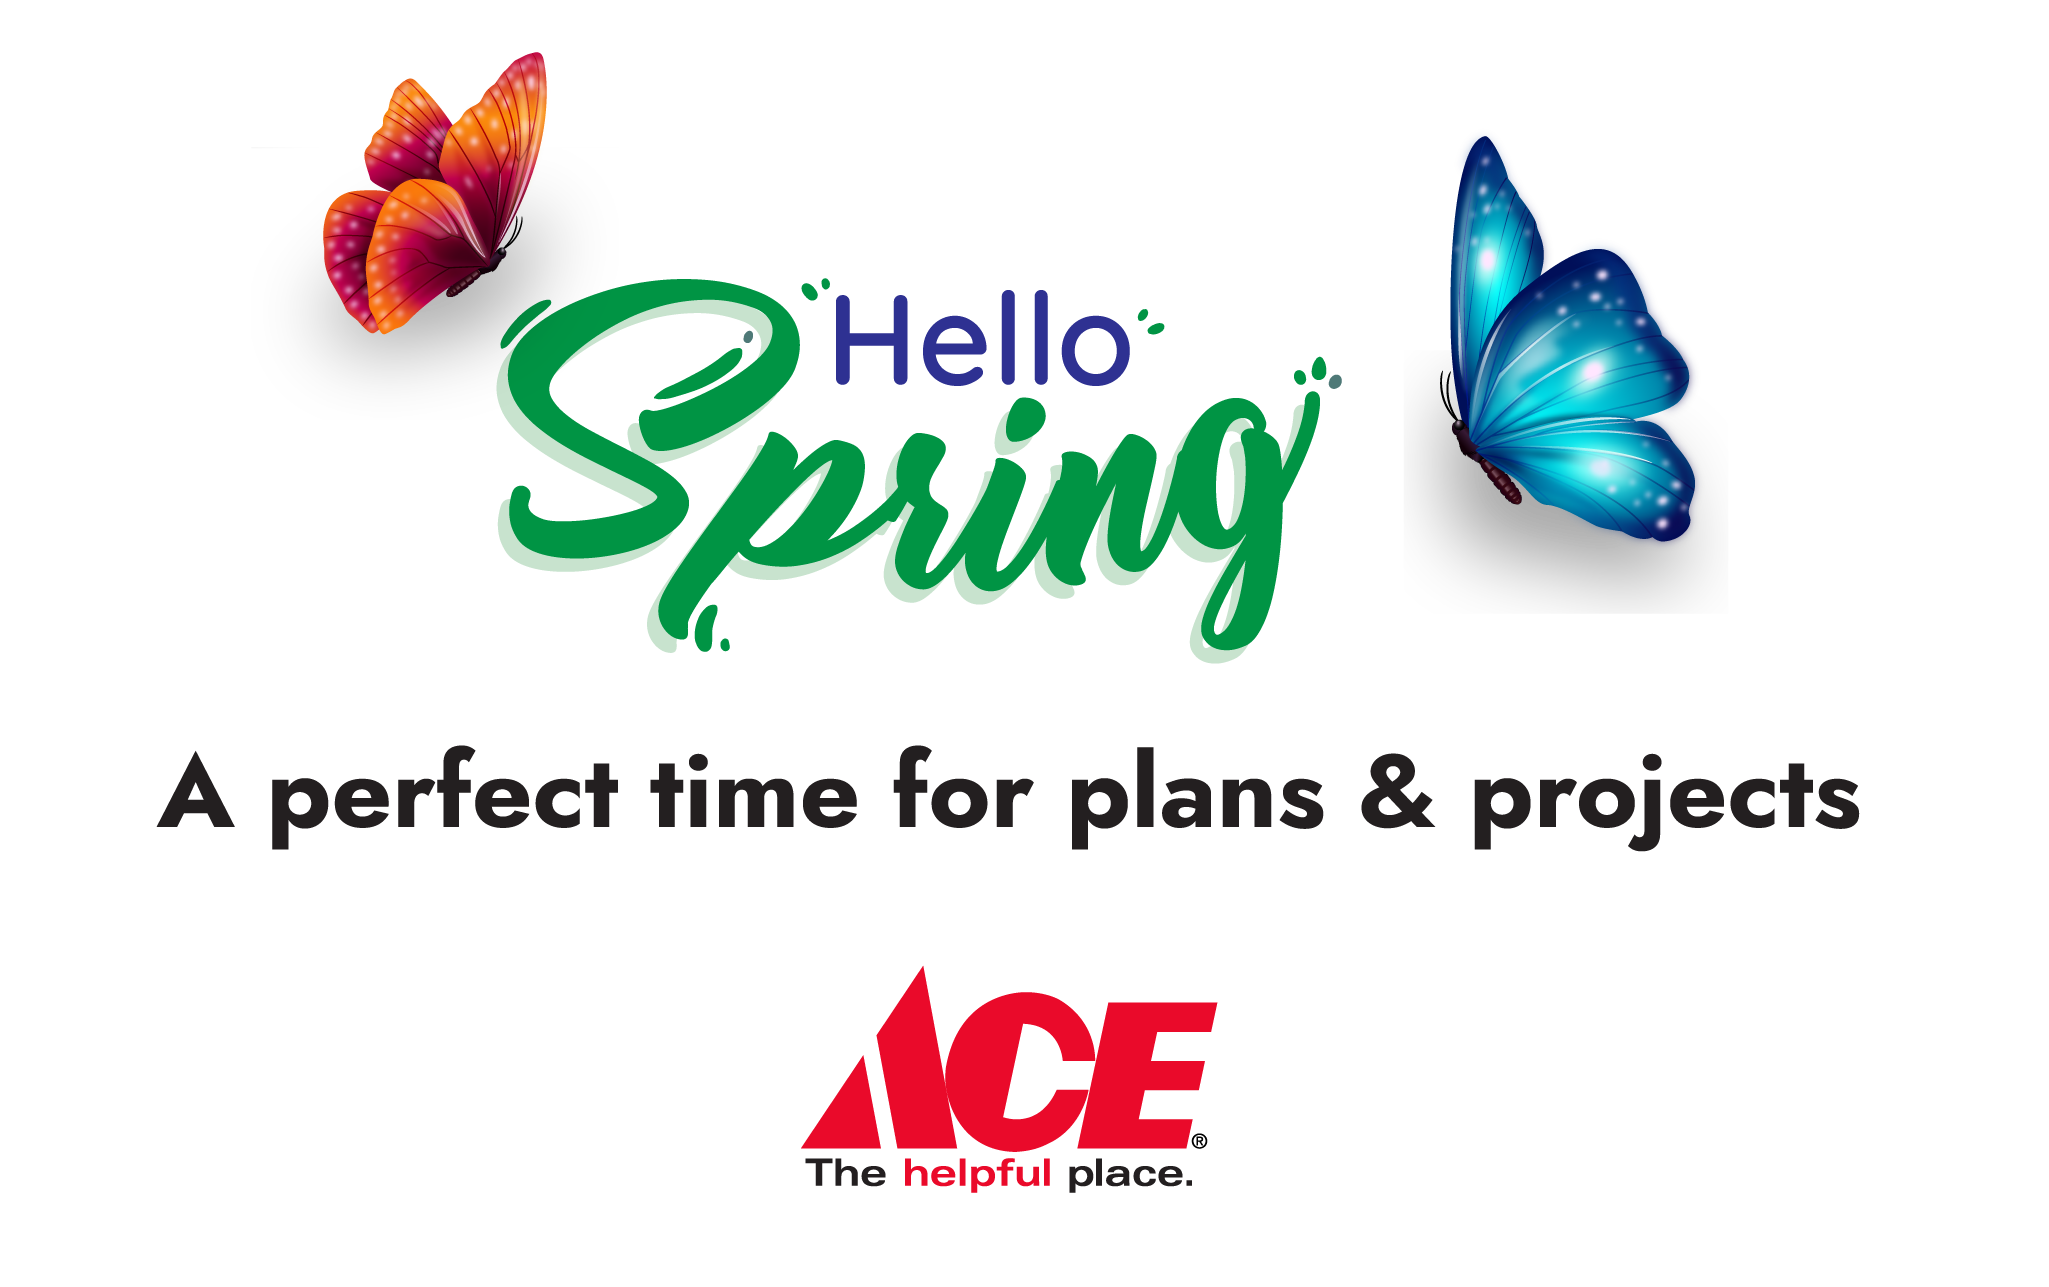 Hello Spring Ace Hardware